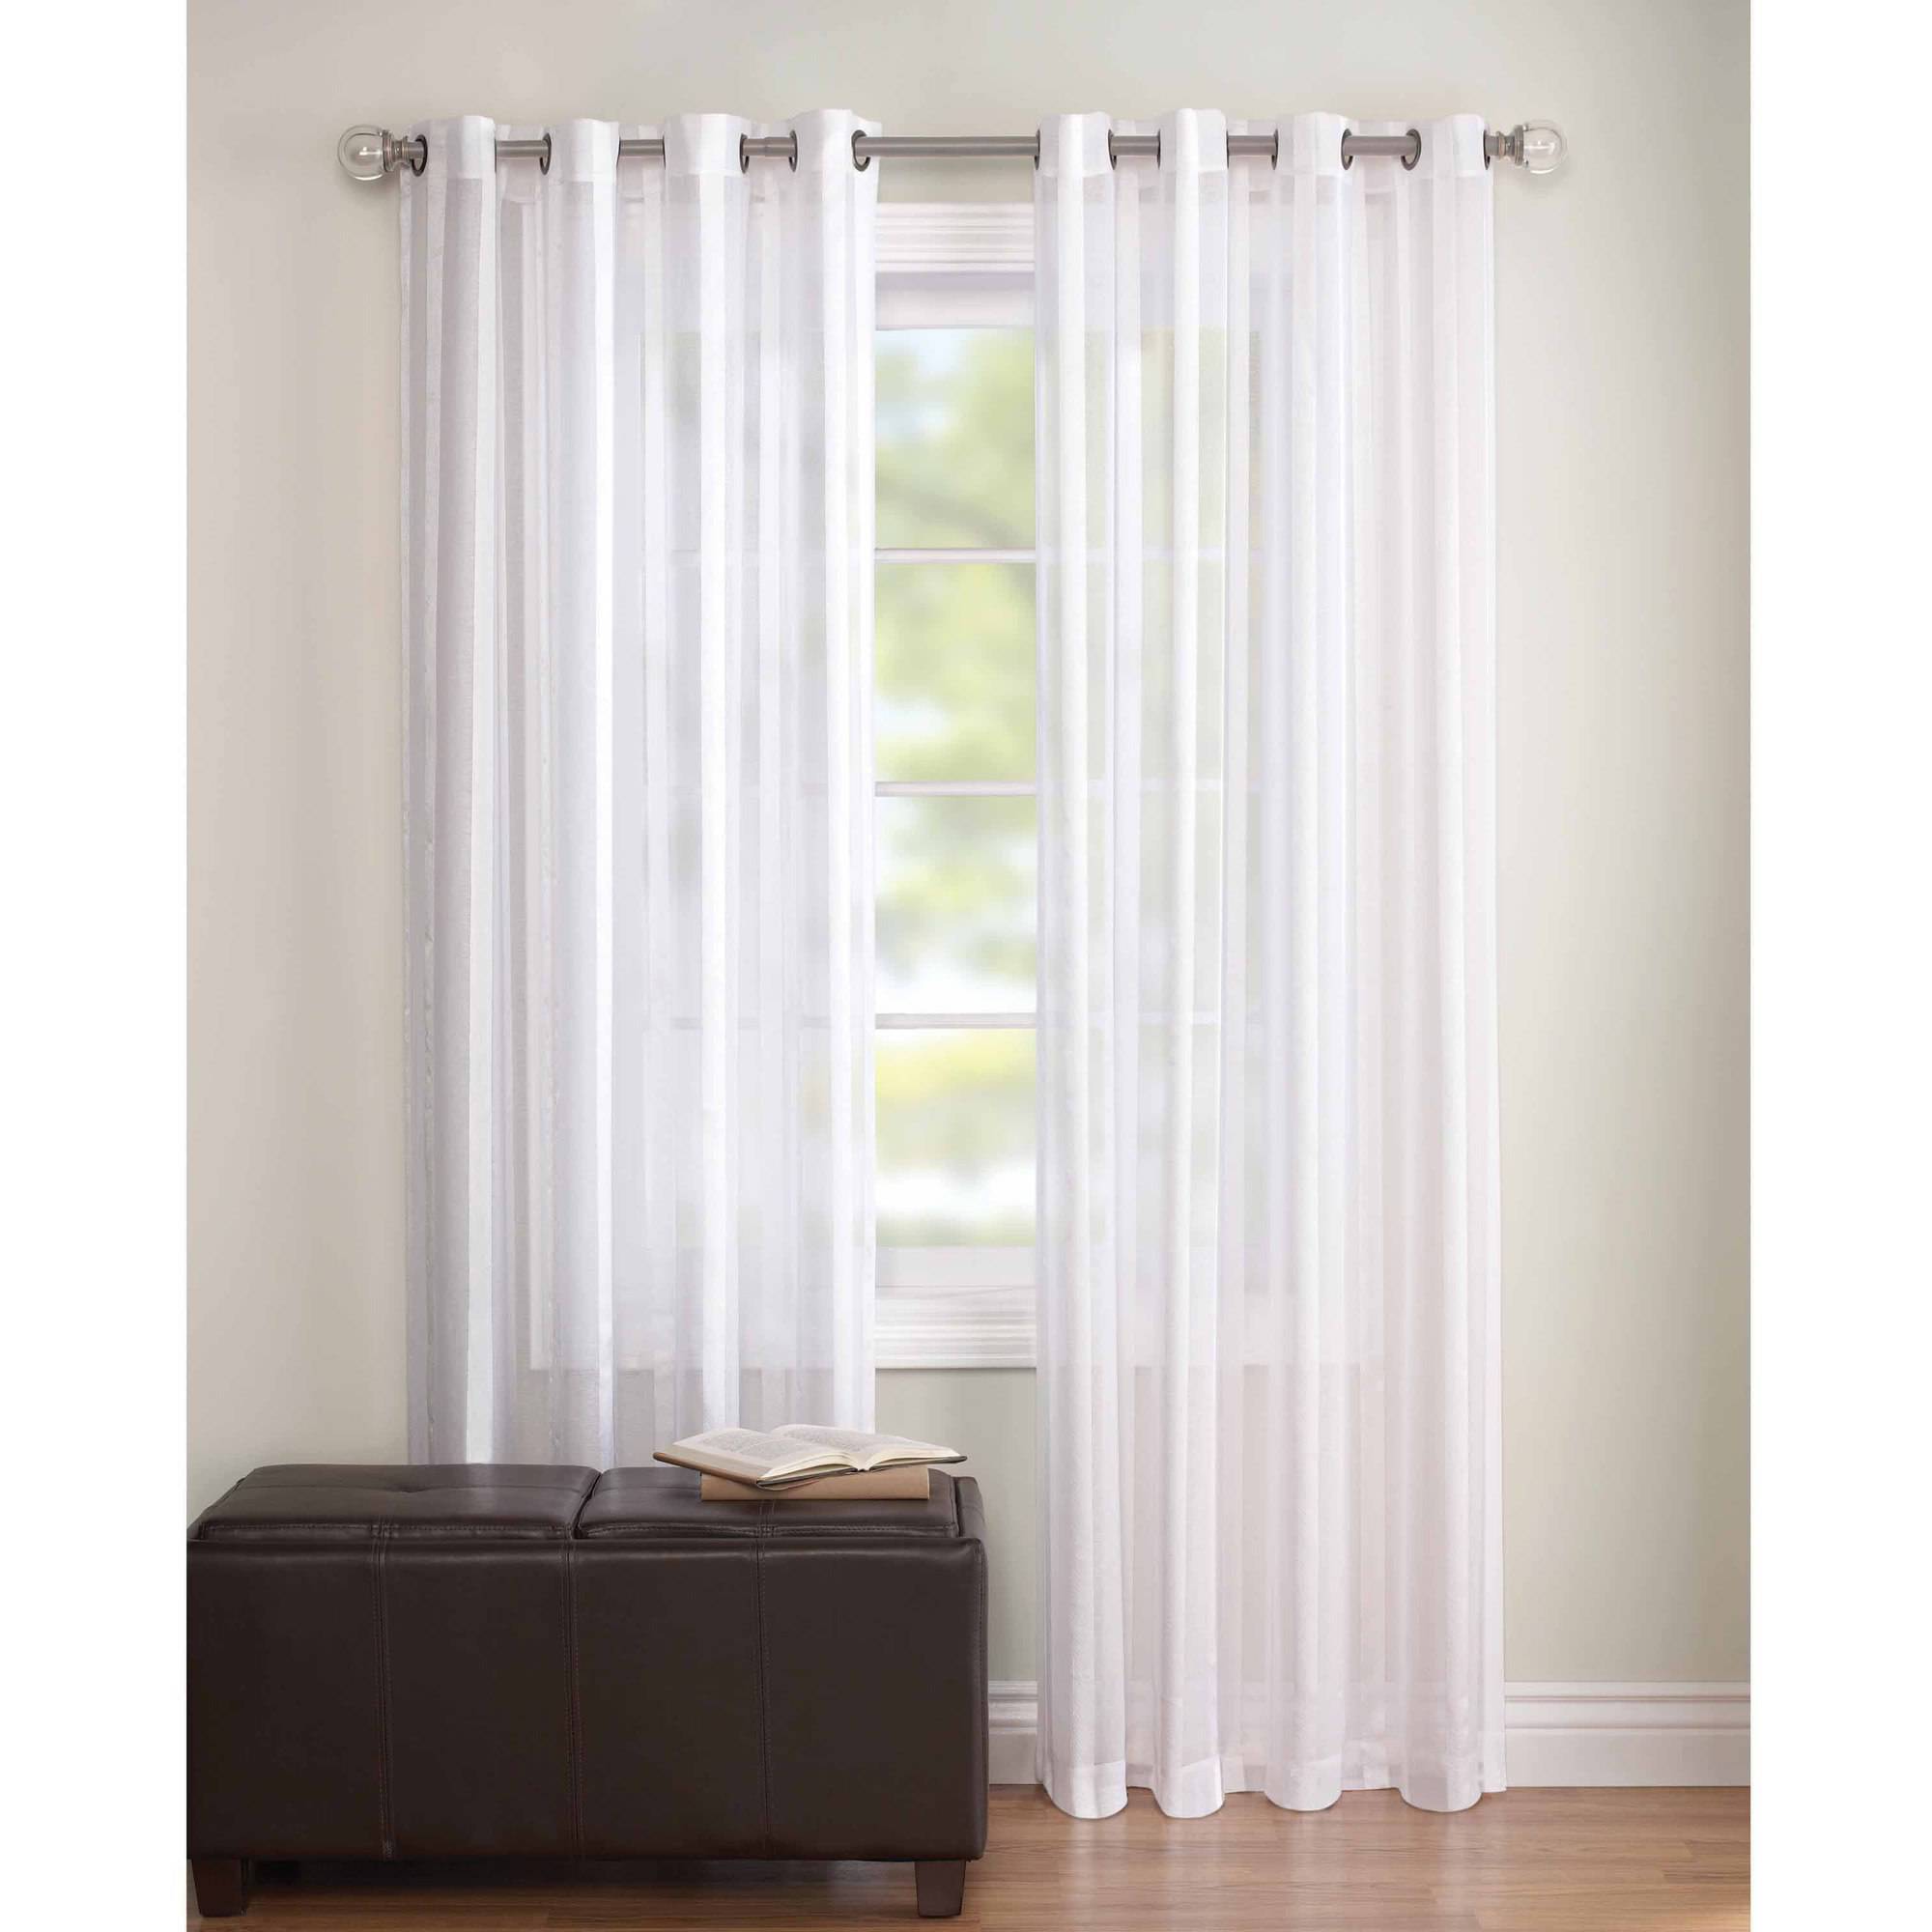 Better Homes and Gardens Toby Textured Stripe Sheer Window Curtain Panel - image 1 of 4